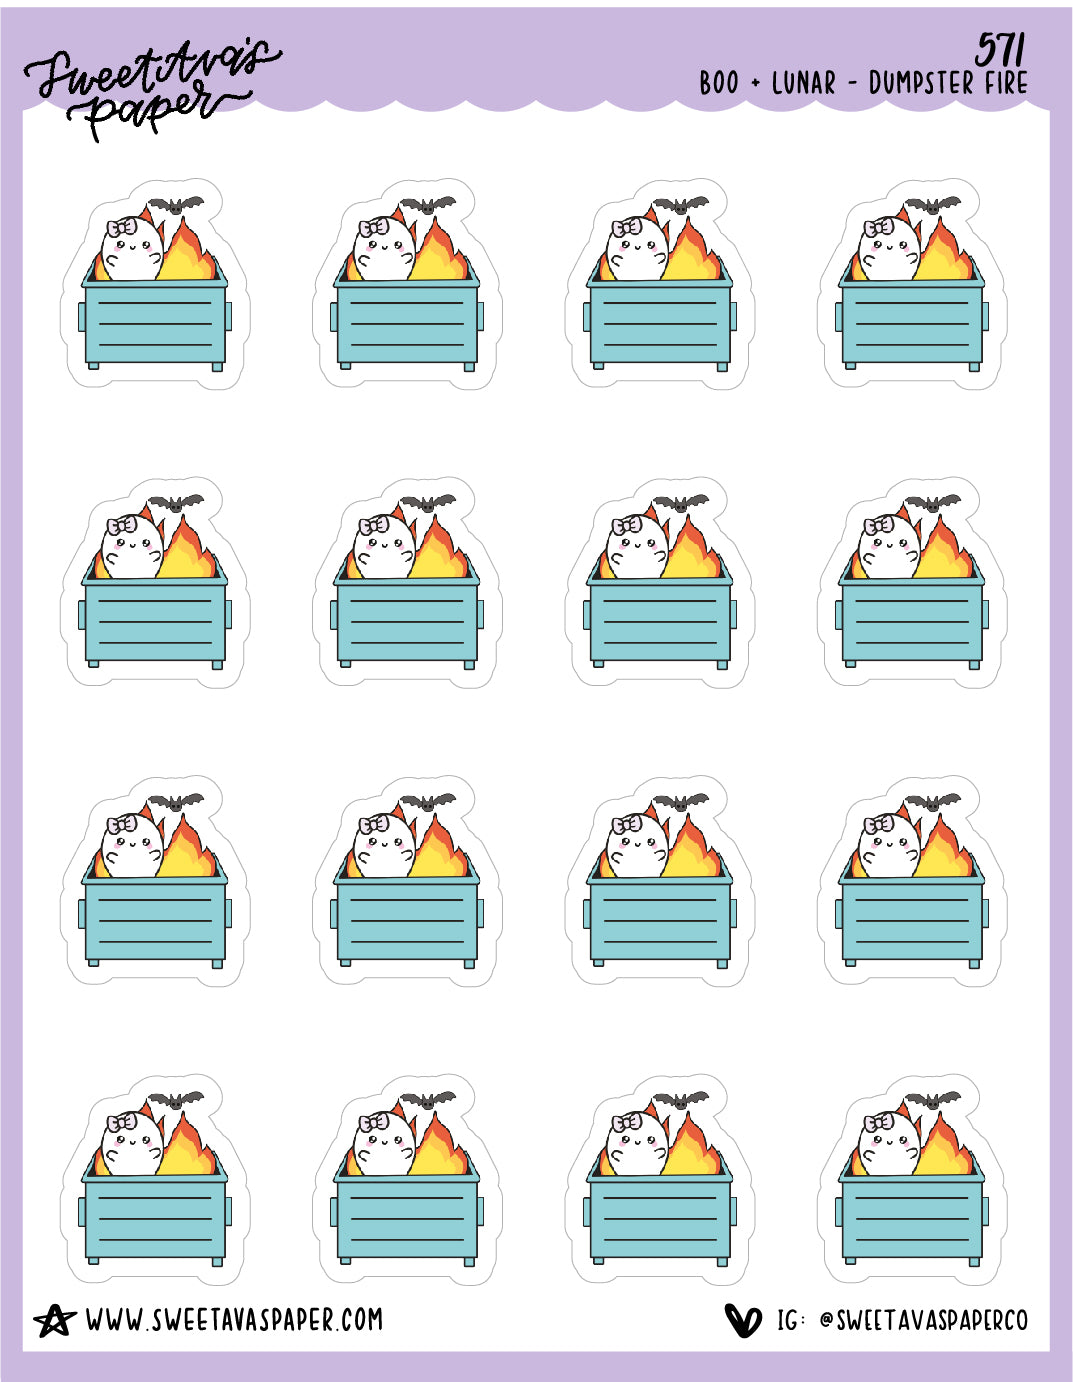 Dumpster Fire Planner Stickers - Boo and Lunar [571]